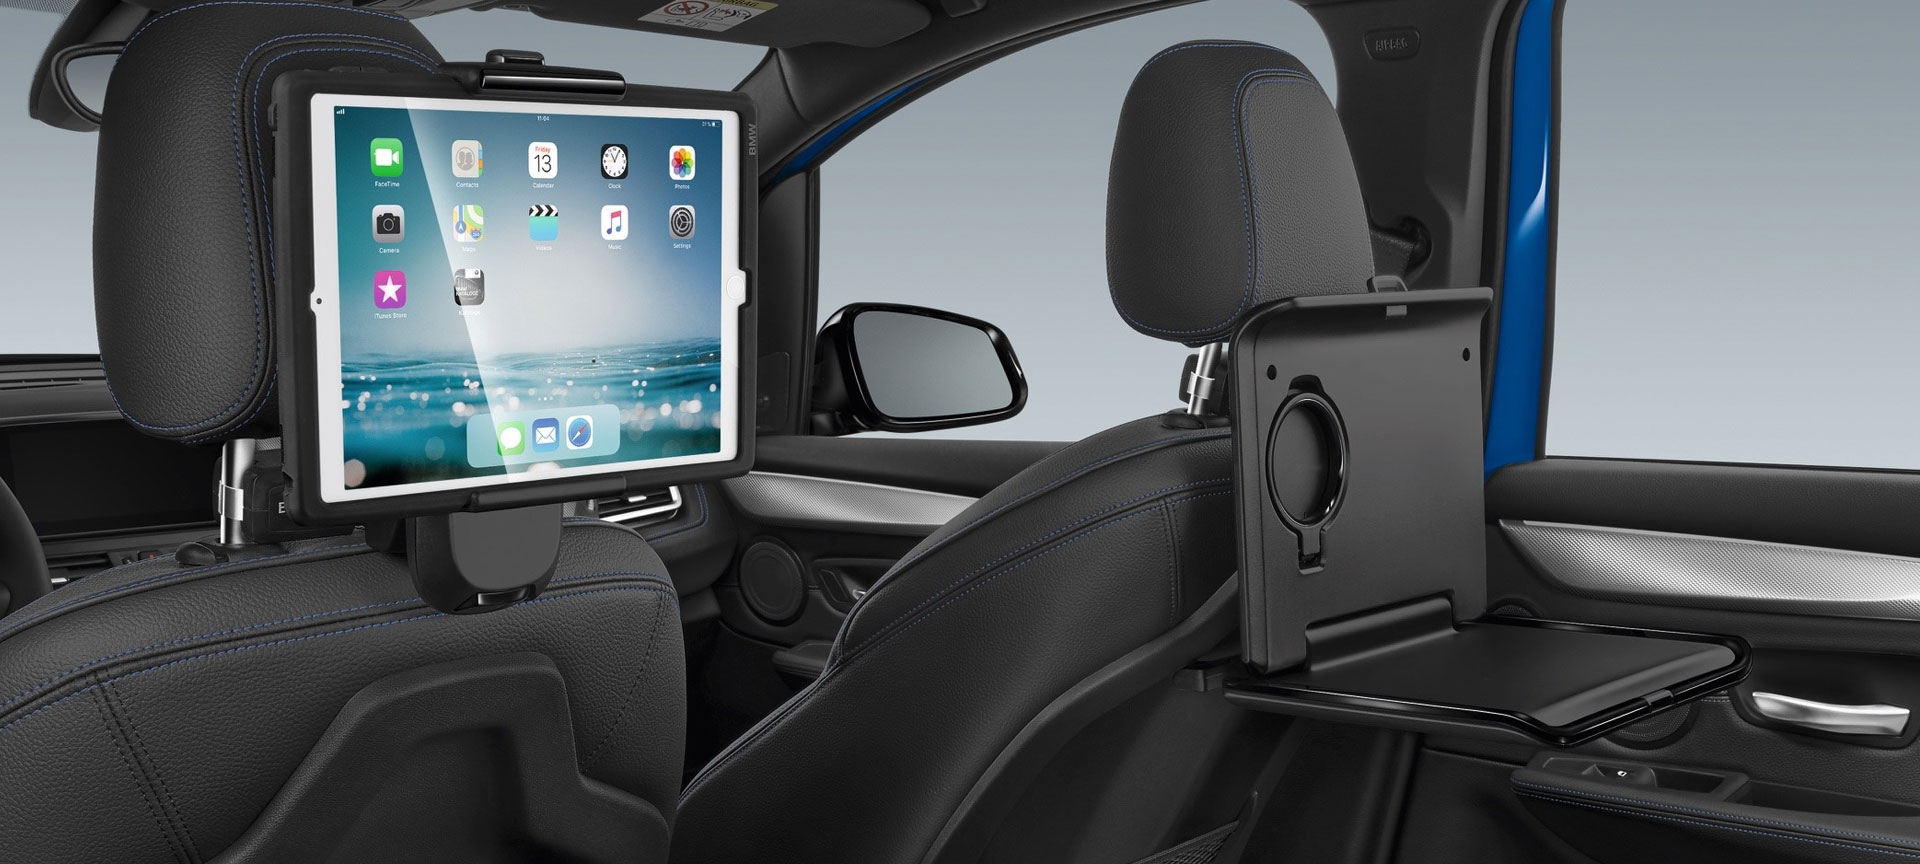 travel and comfort system bmw